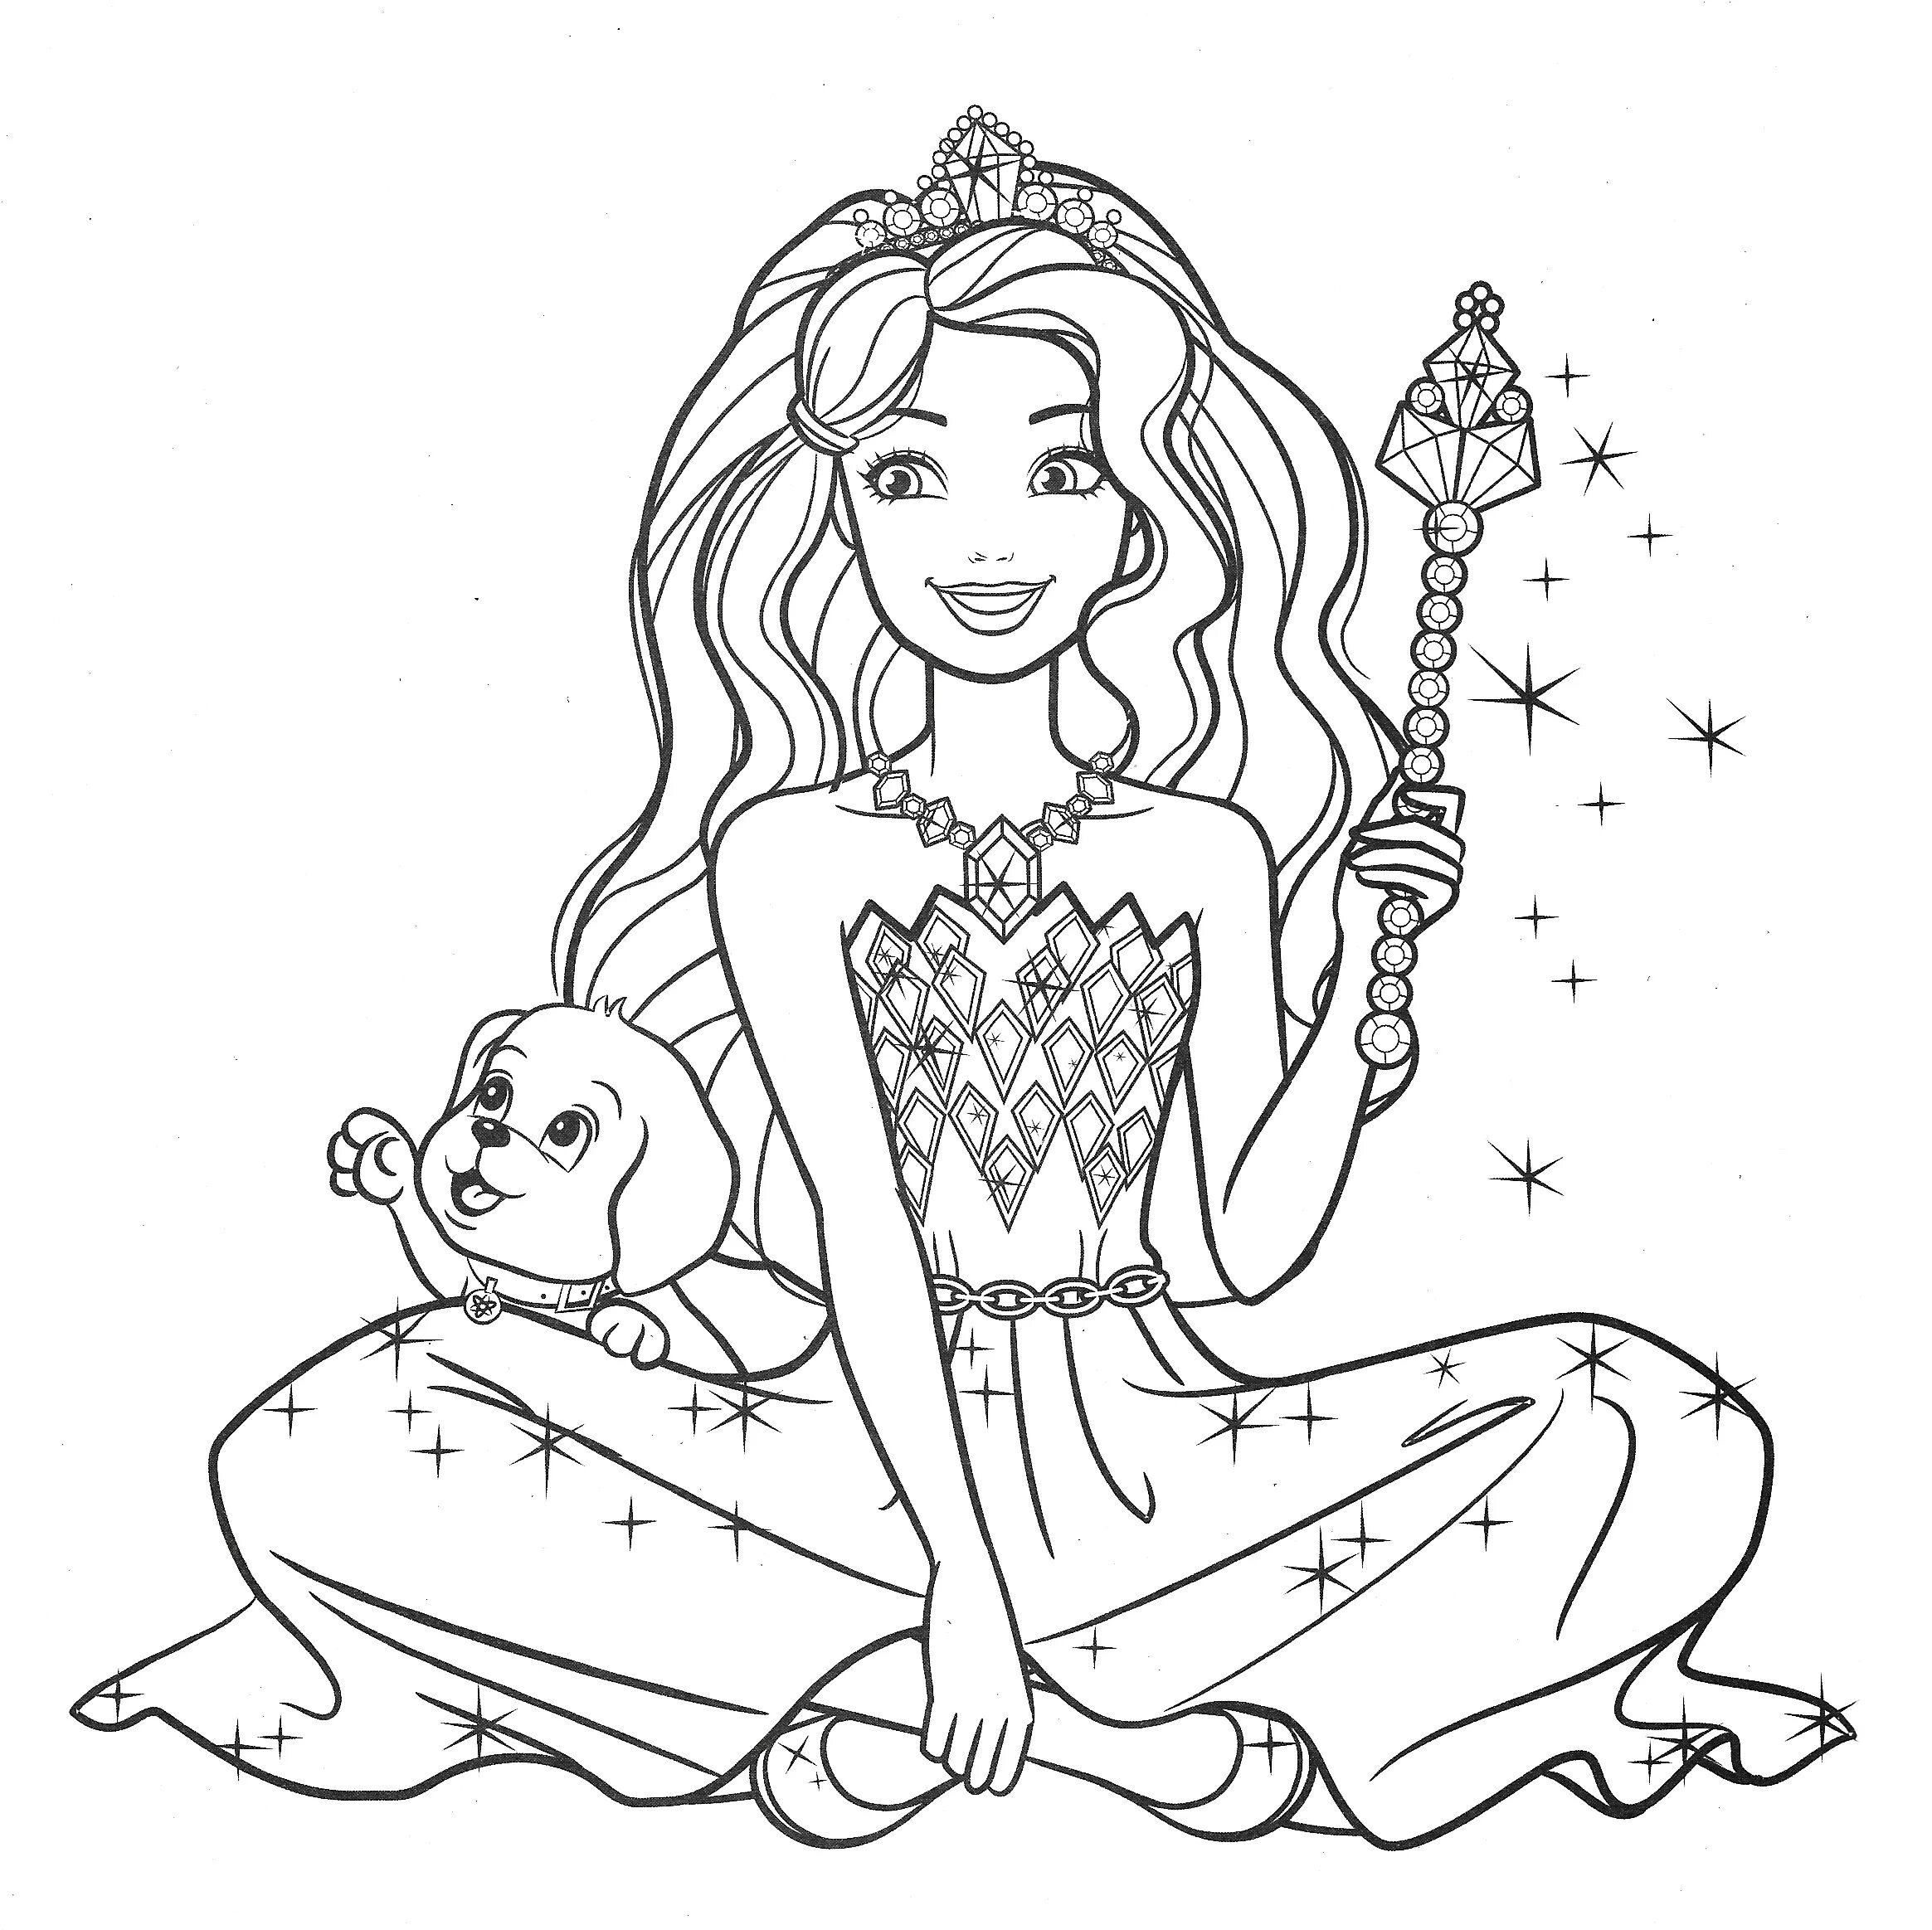 Chelsea luminous doll coloring page